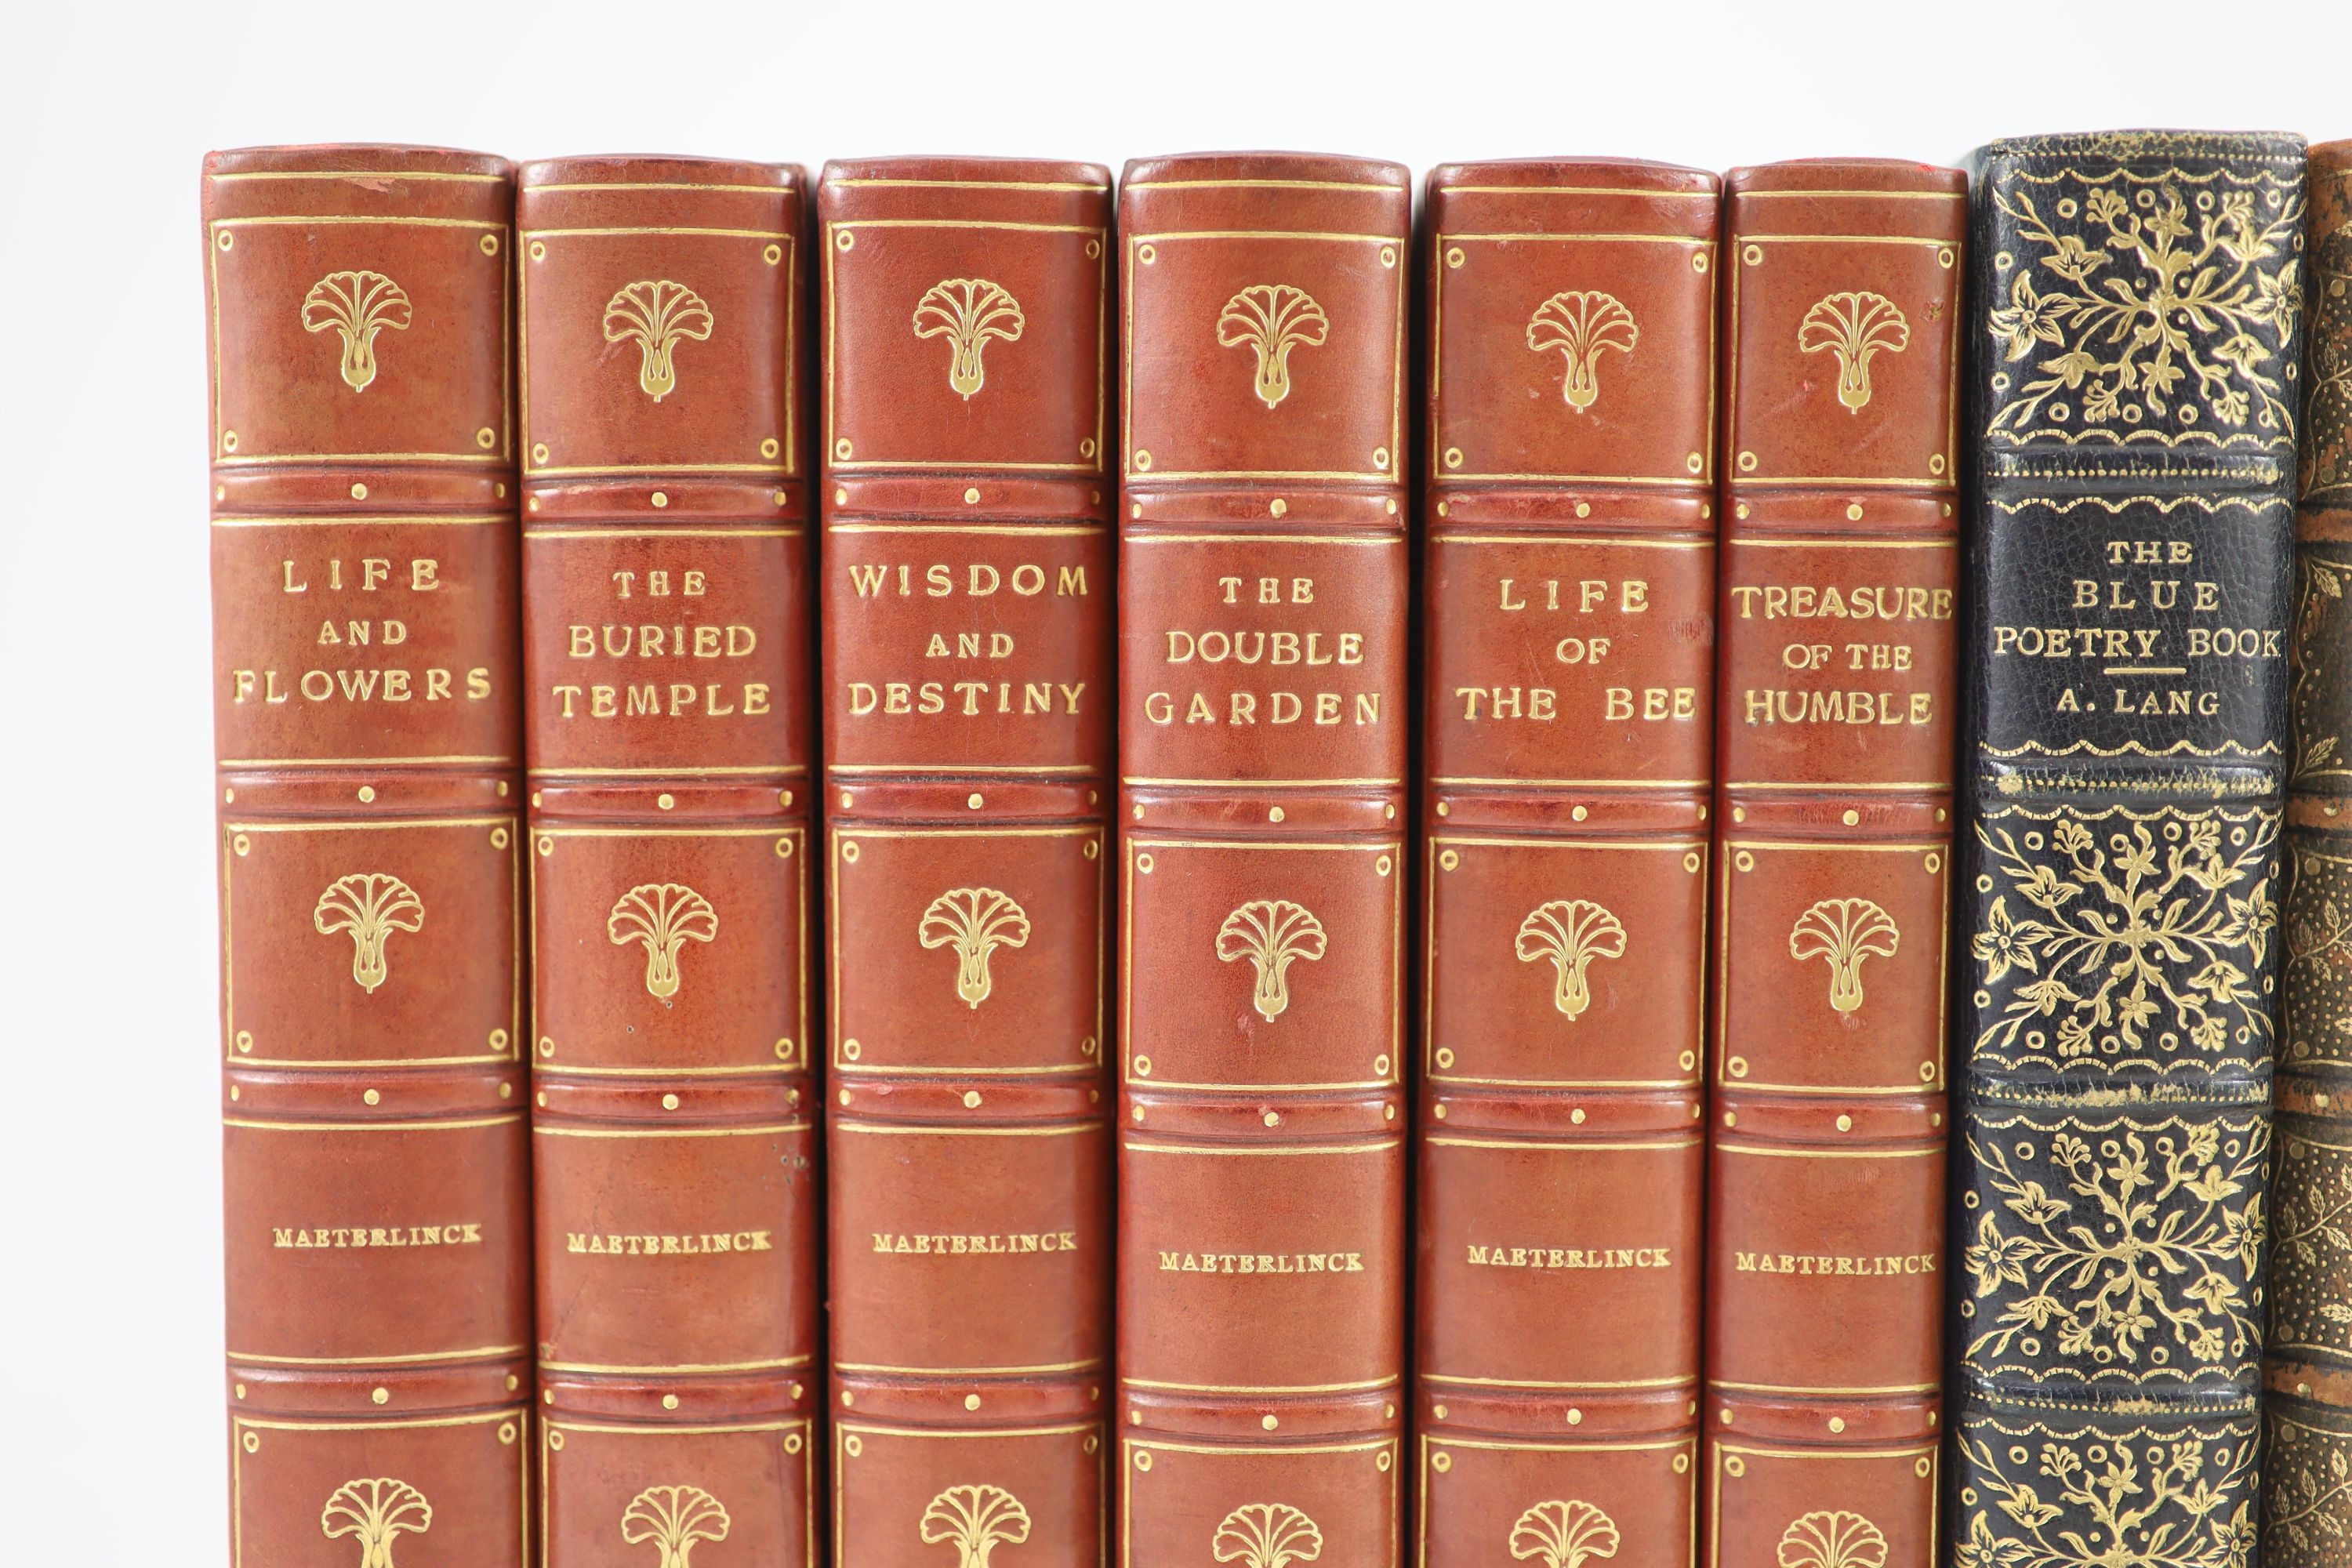 Maeterlinck, Maurice - Works, 6 vols, 8vo, half calf, George Allen, London, 1902-10; Lever, Charles - Confessions of Con. Cregan. 2 vols, London, c.1849; and 3 others (12)